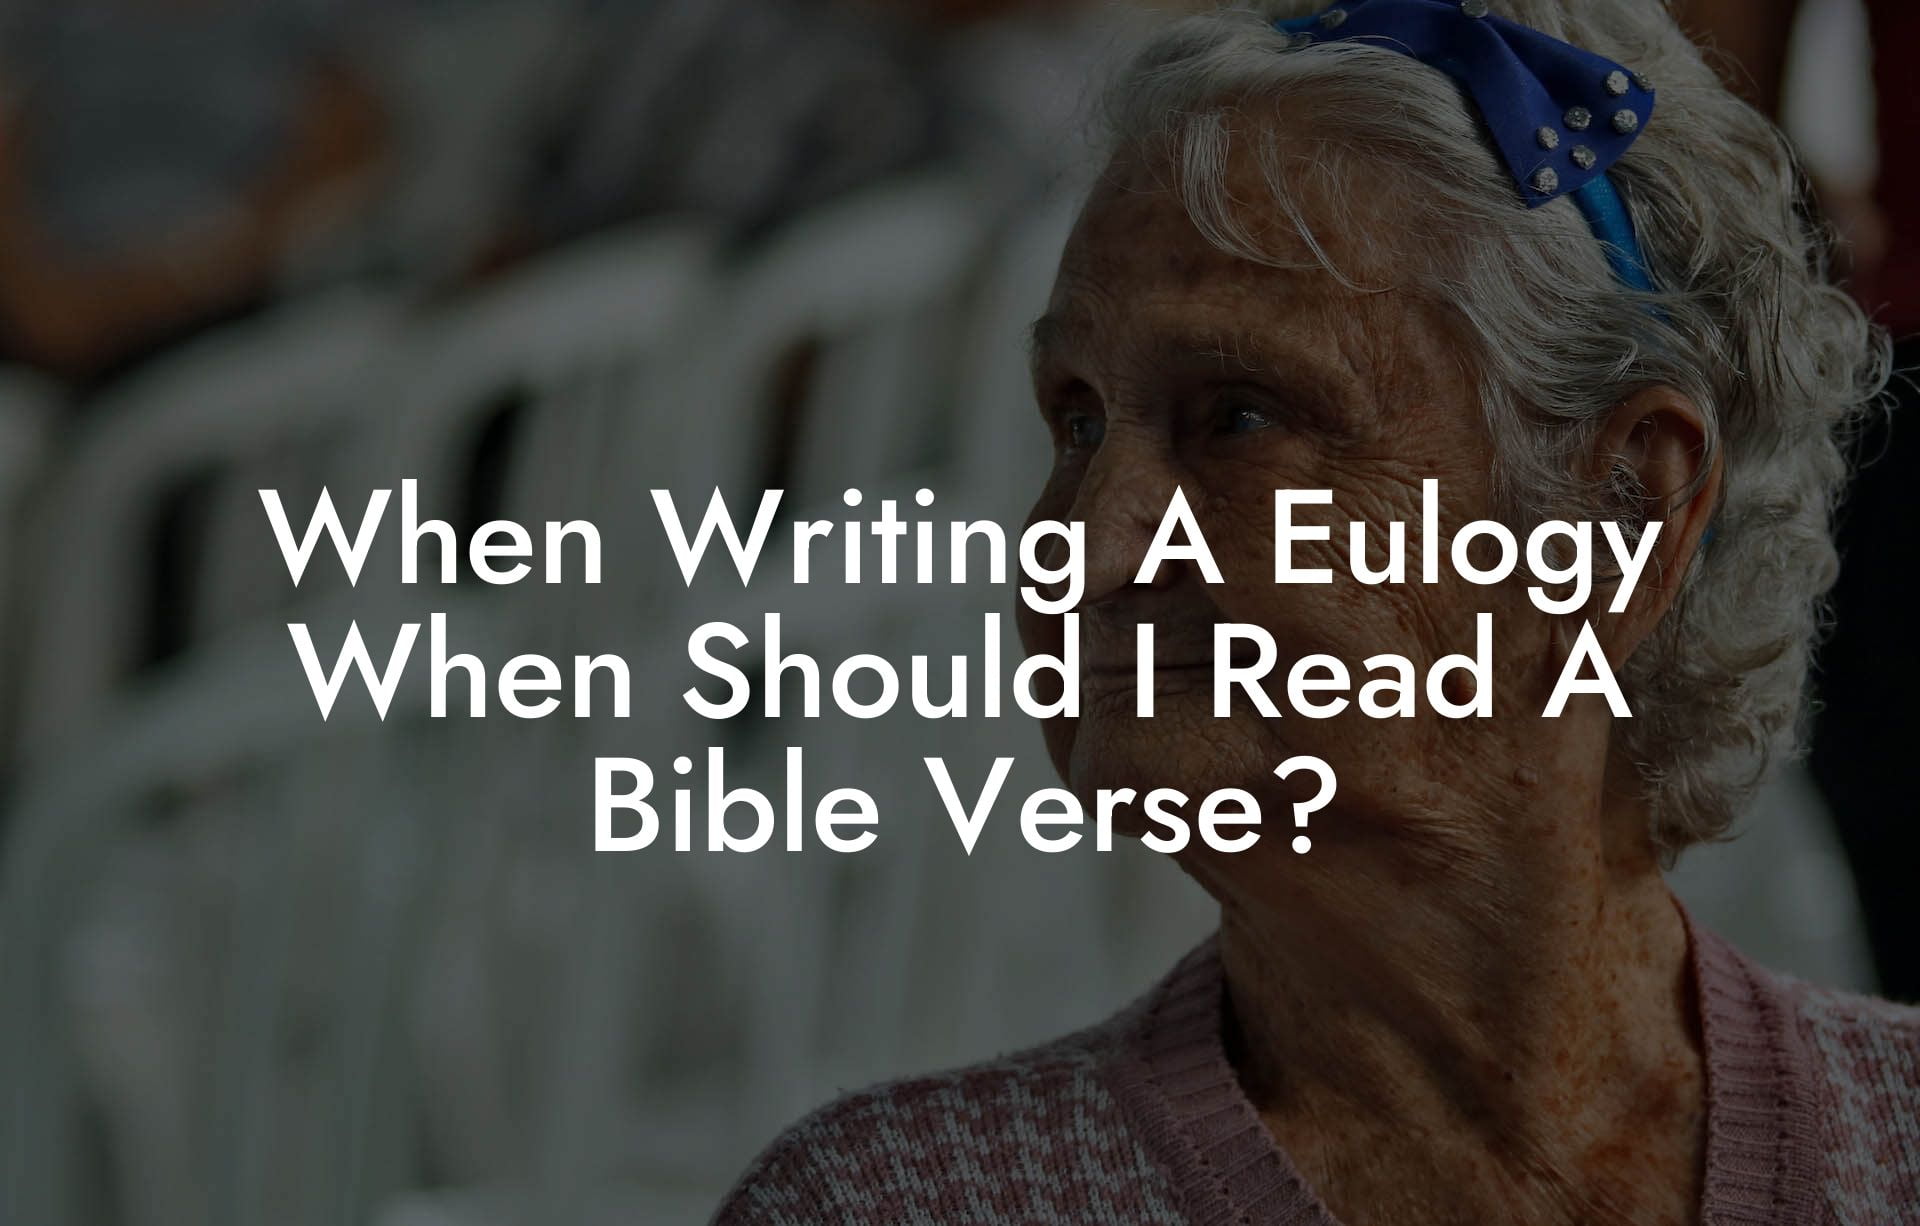 When Writing A Eulogy When Should I Read A Bible Verse?